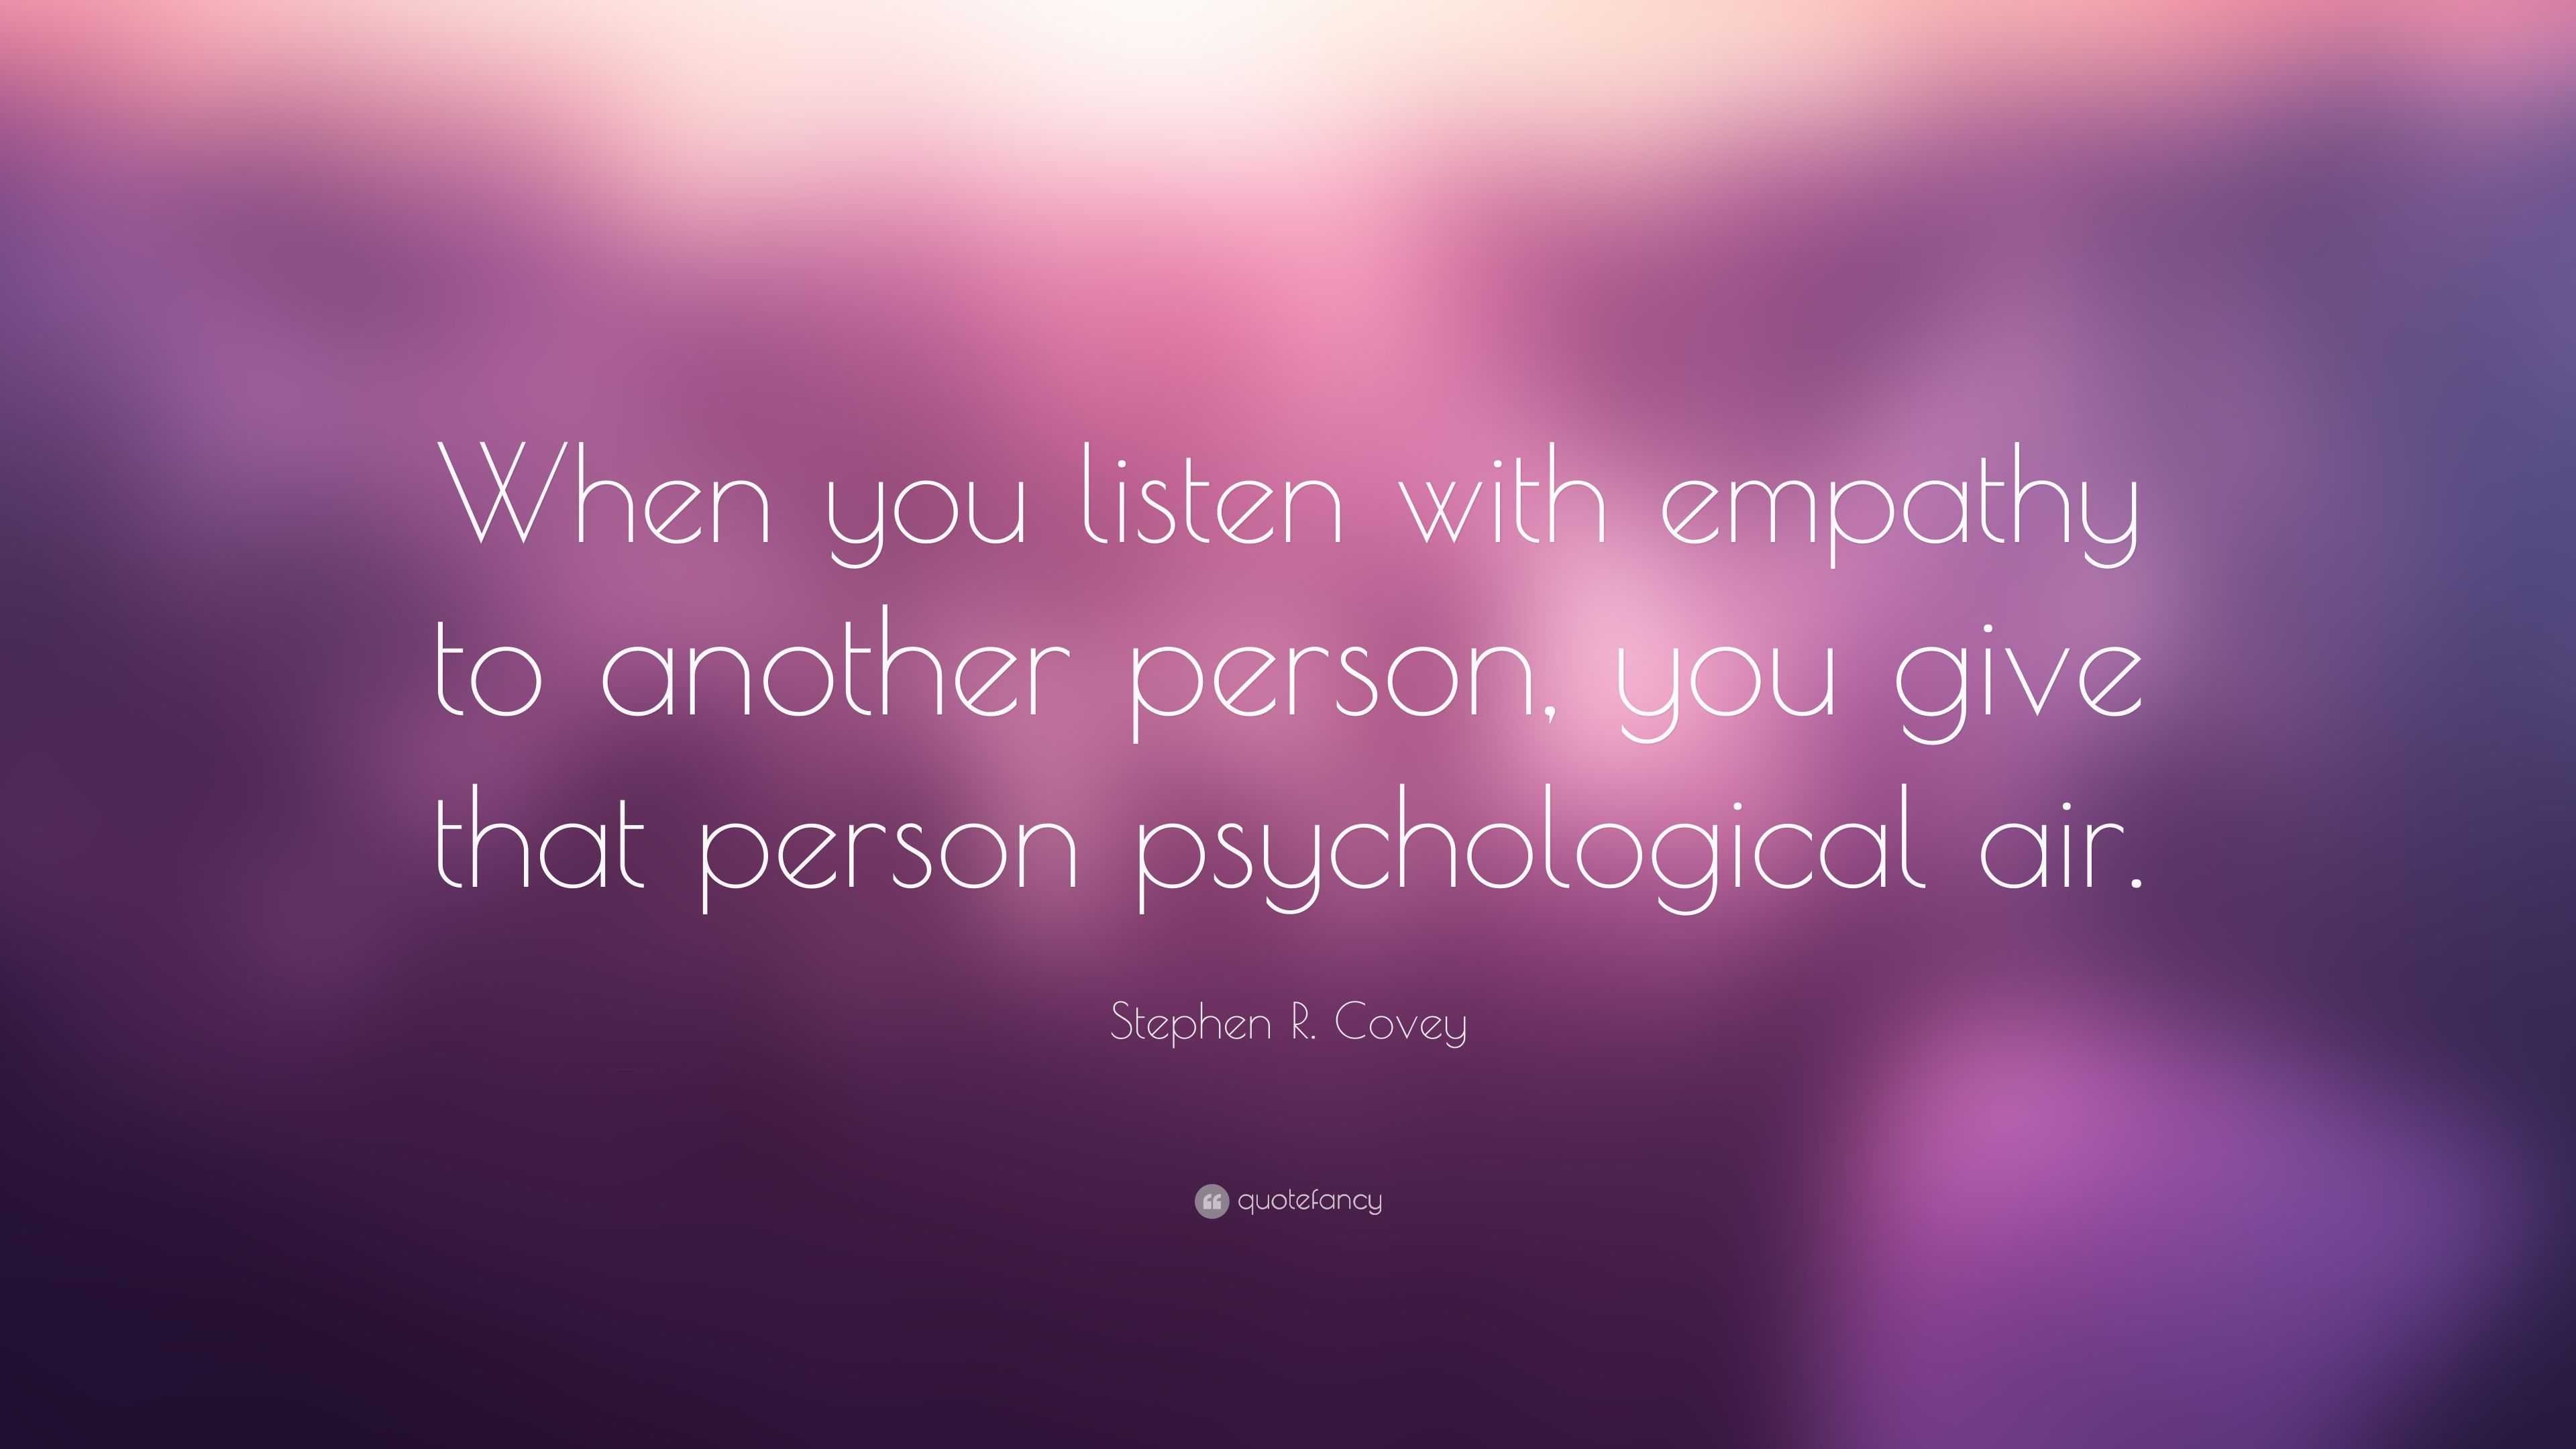 Stephen R. Covey Quote: “When you listen with empathy to another person ...